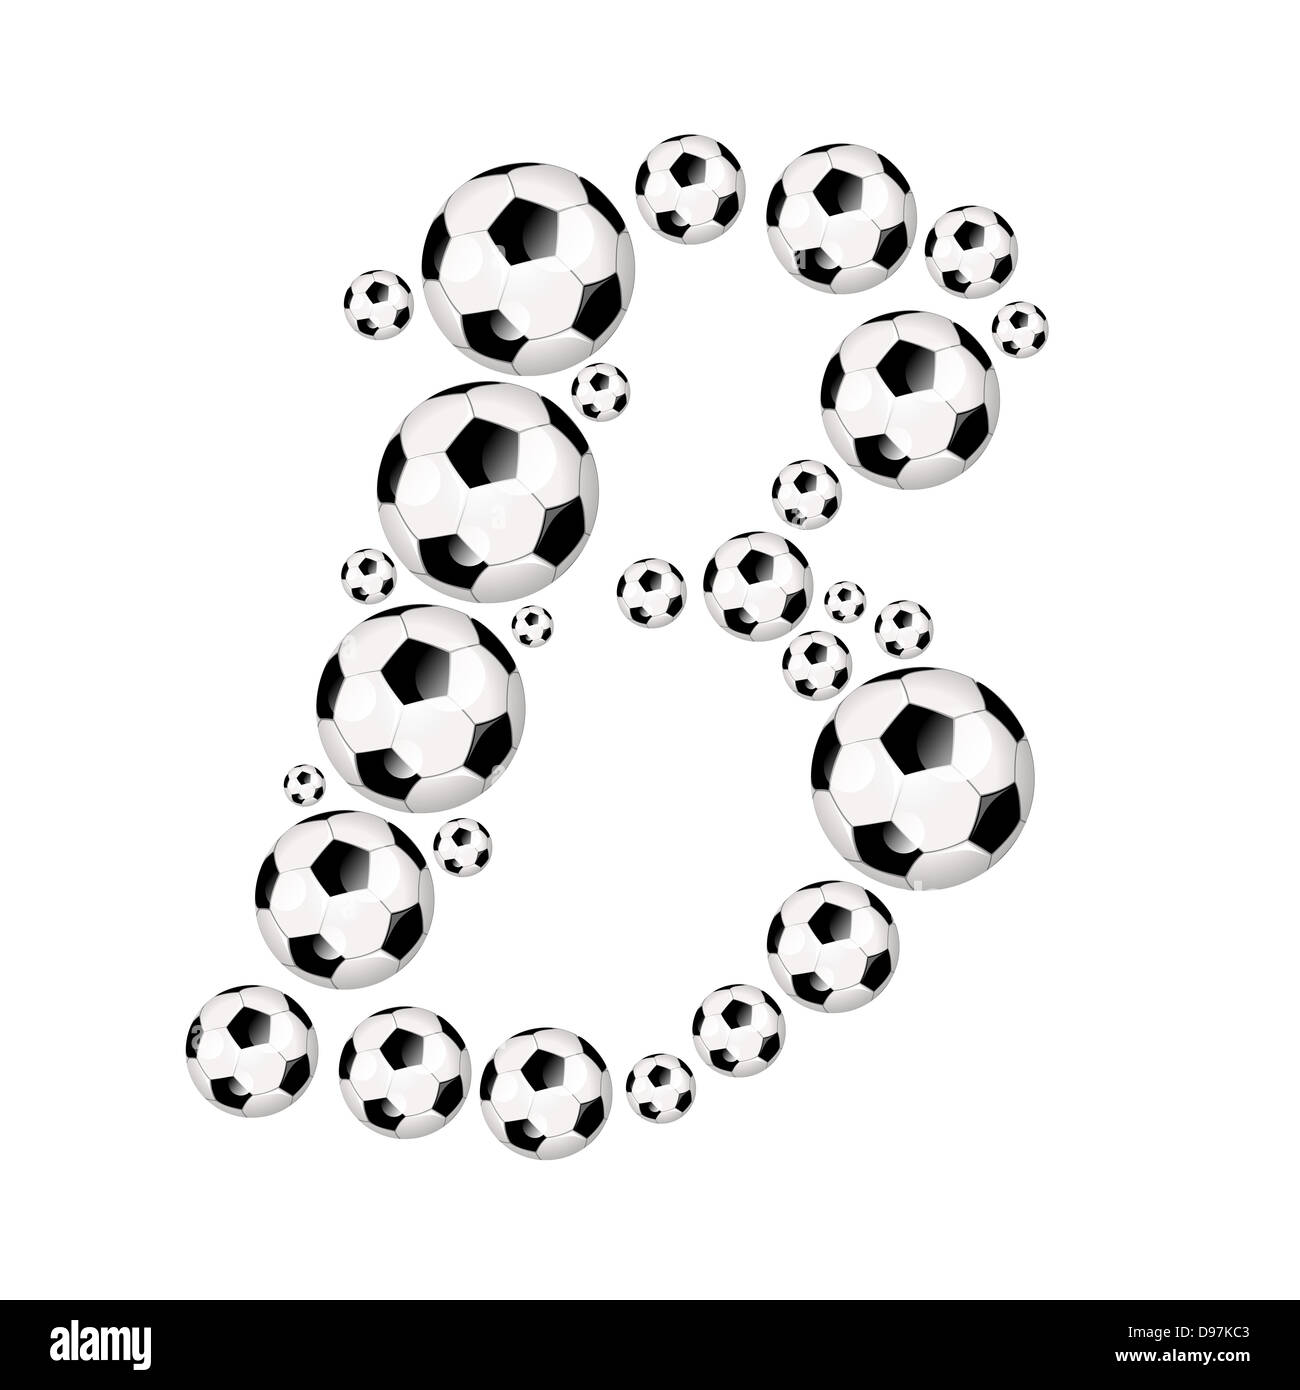 Soccer alphabet capital letter B illustration icon with soccer or footballs Stock Photo